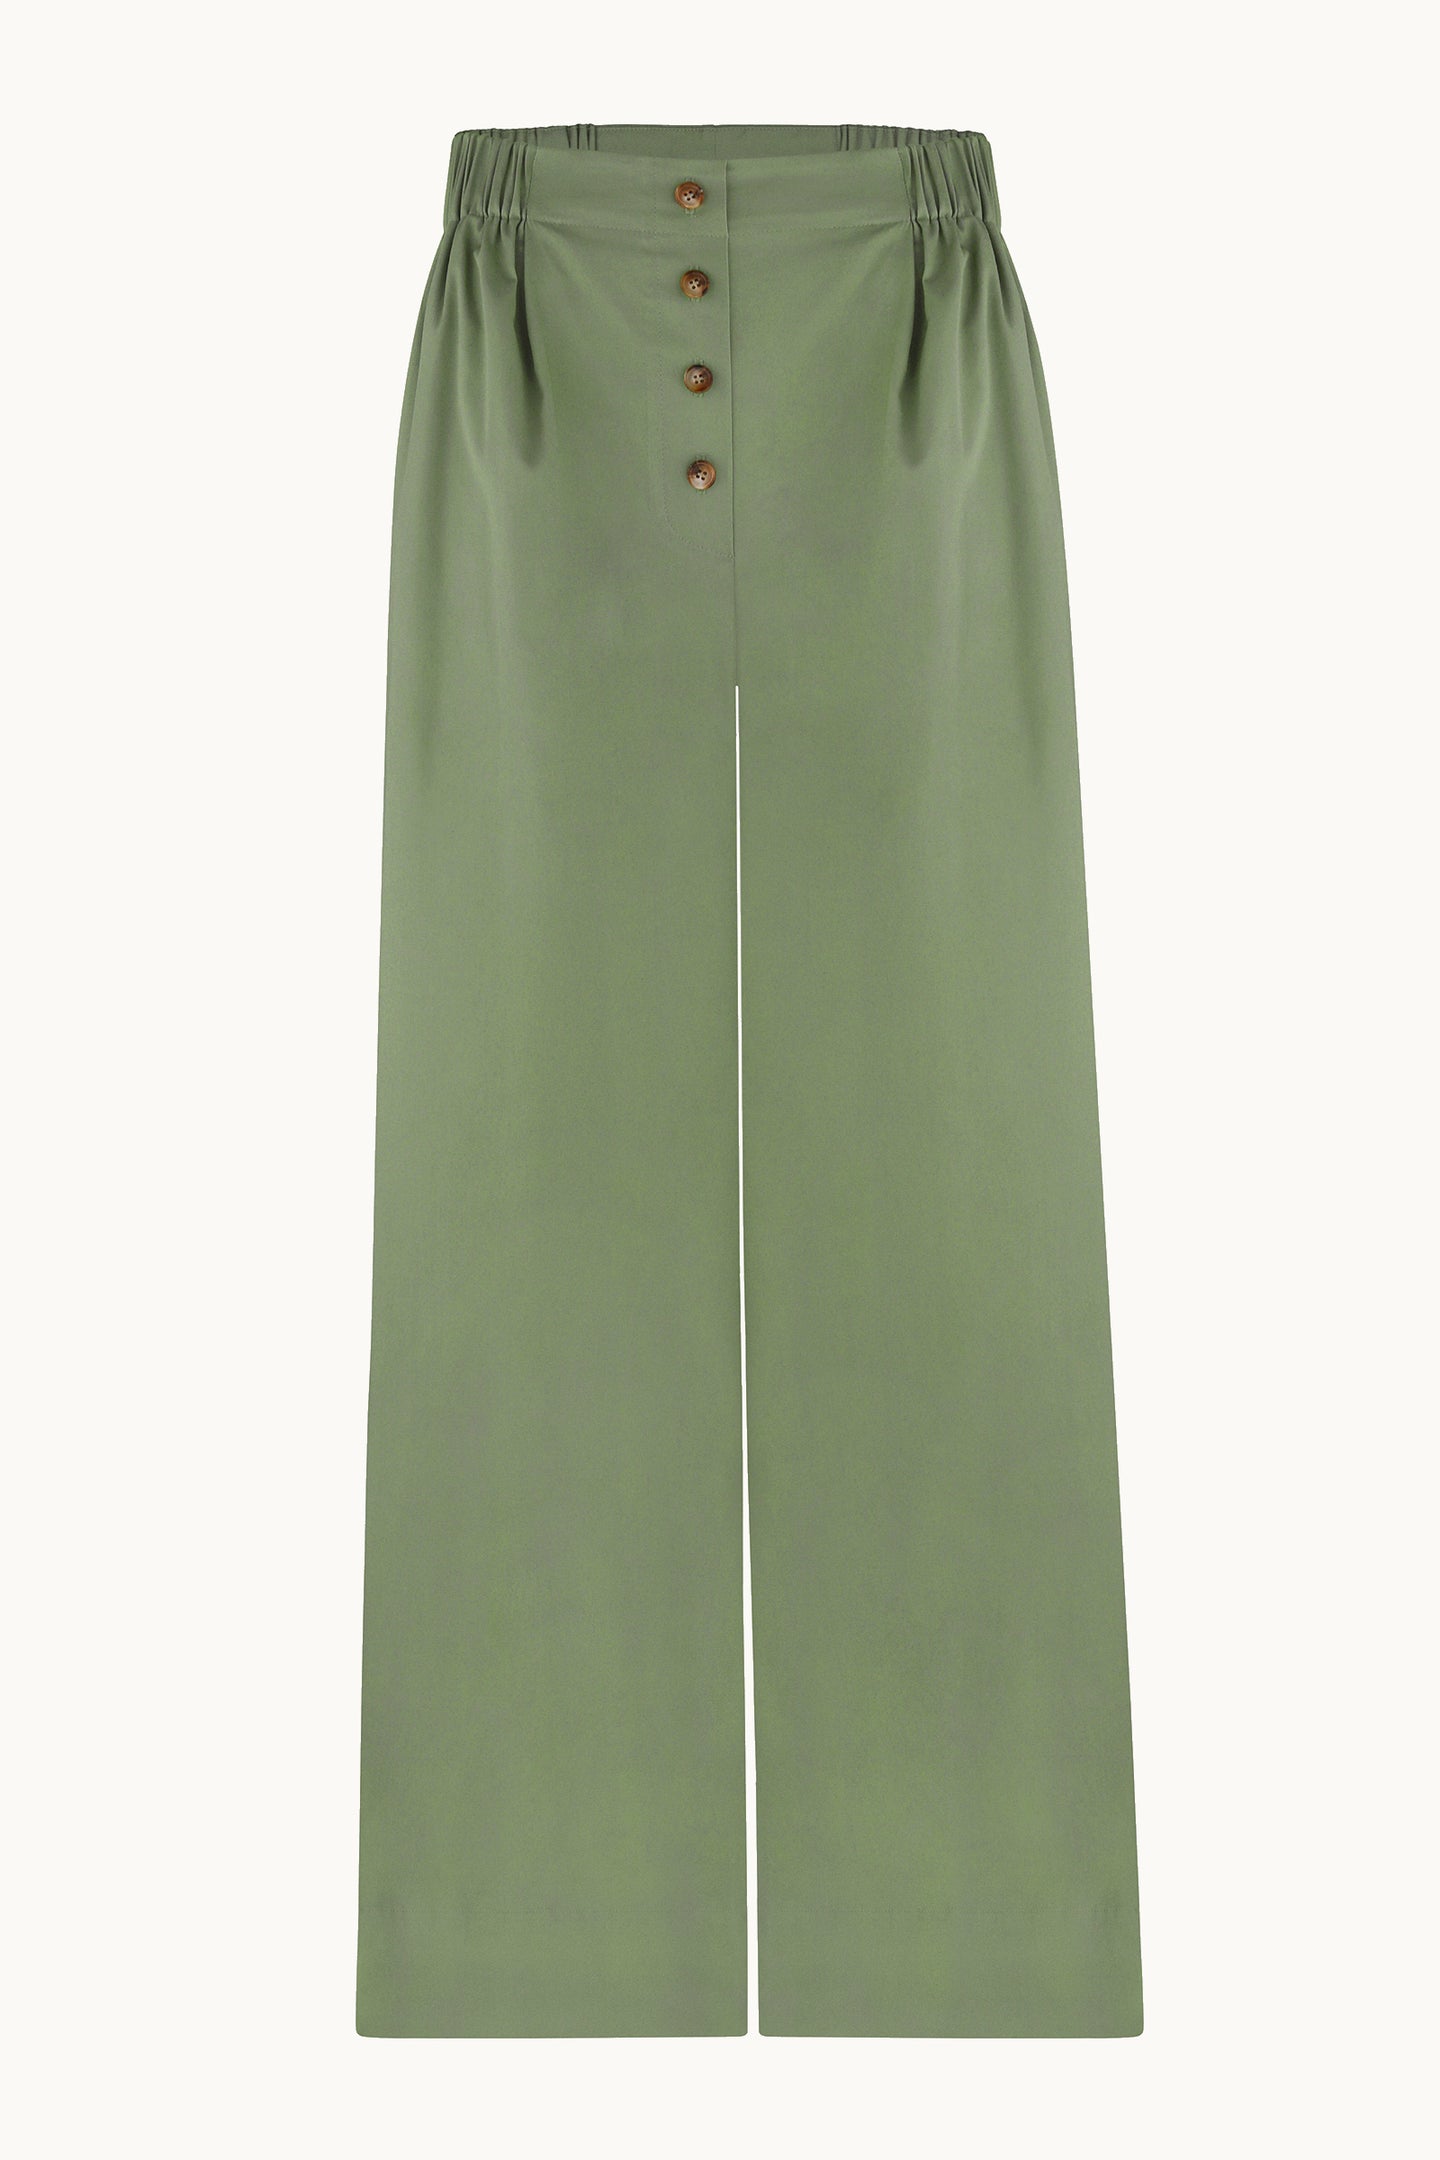 Melba olive trousers front view